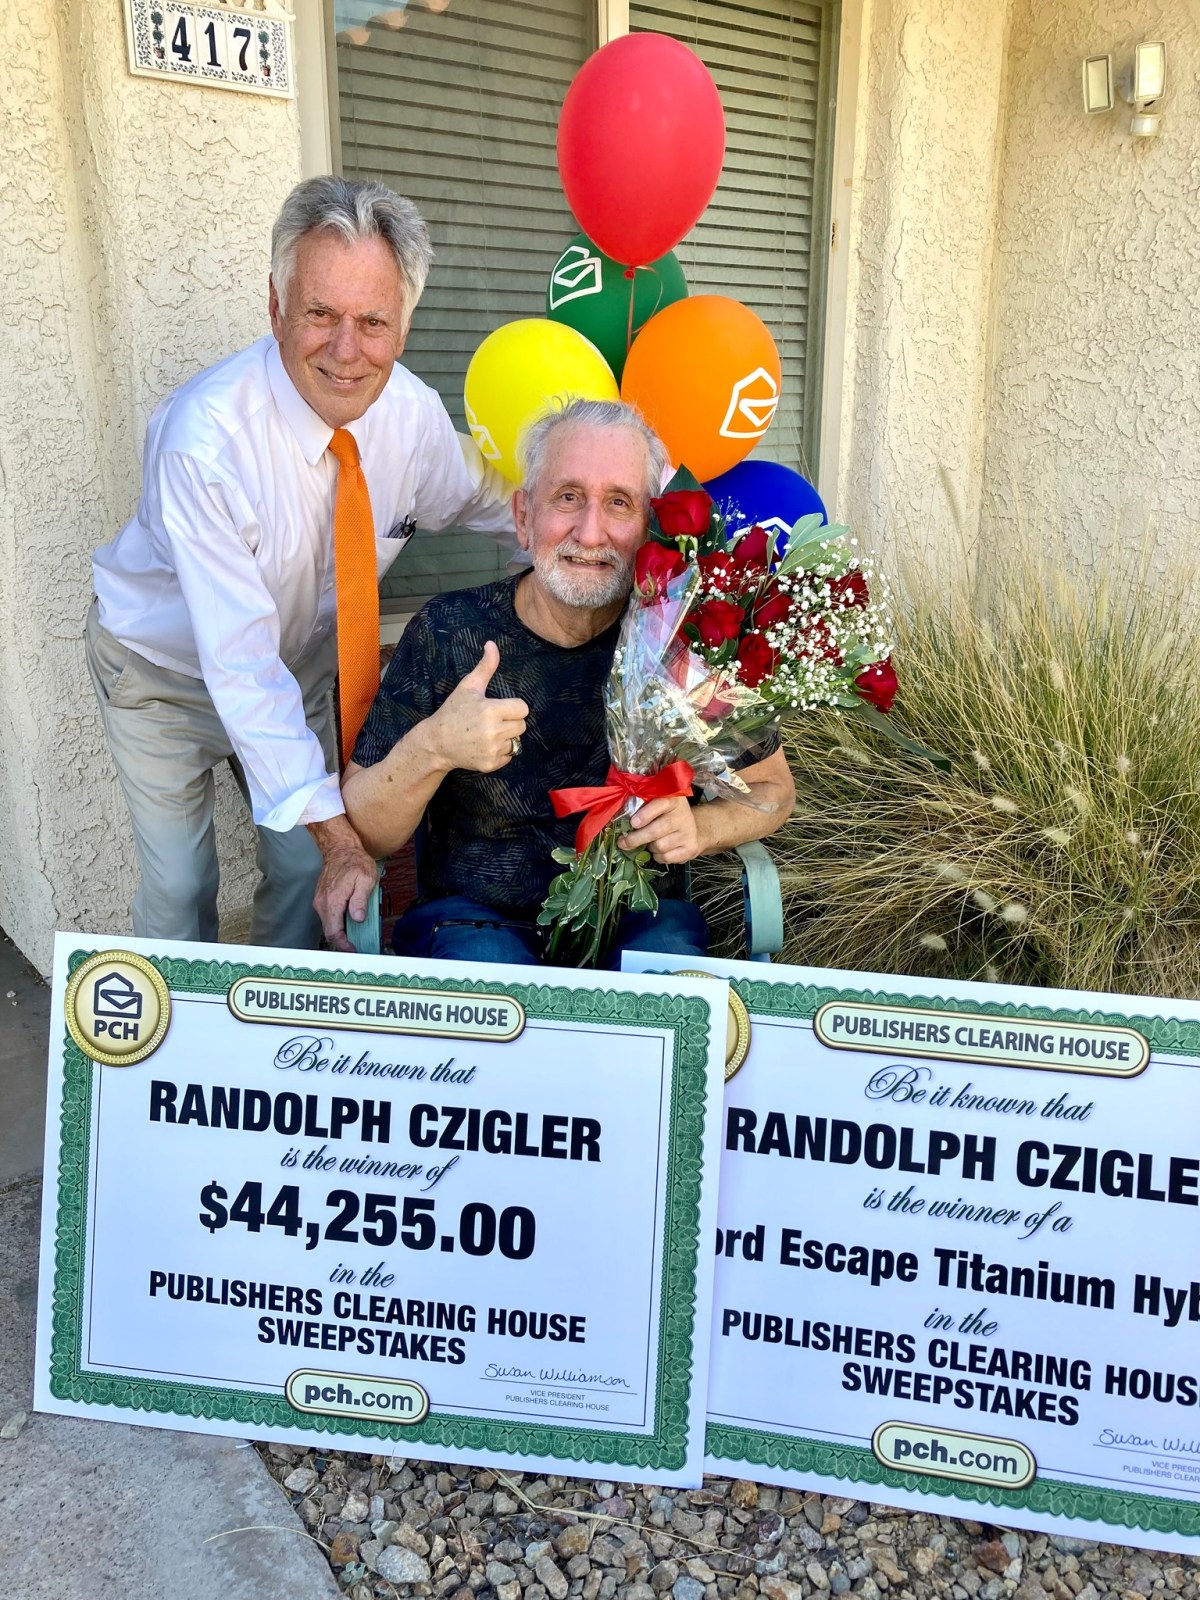 #WinnerWednesday: Randolph C. Of Las Vegas, Nevada Was Visibly Shaken When Given The Choice Between A Vehicle Or $44,255